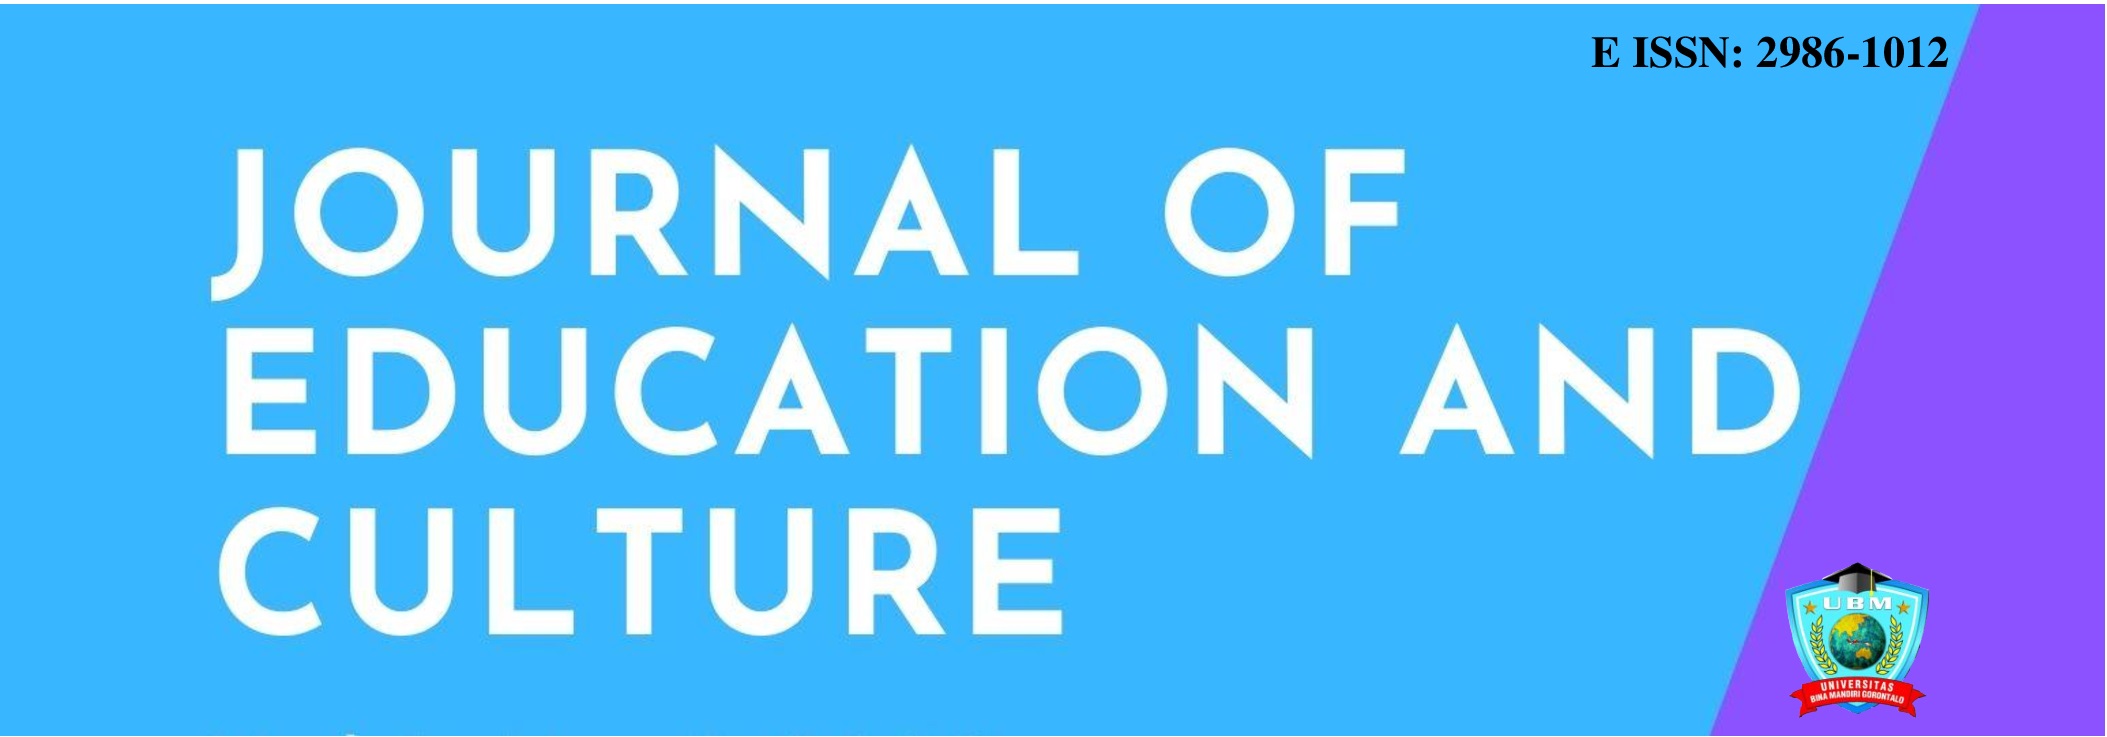 Journal of Education and Culture (JEaC)